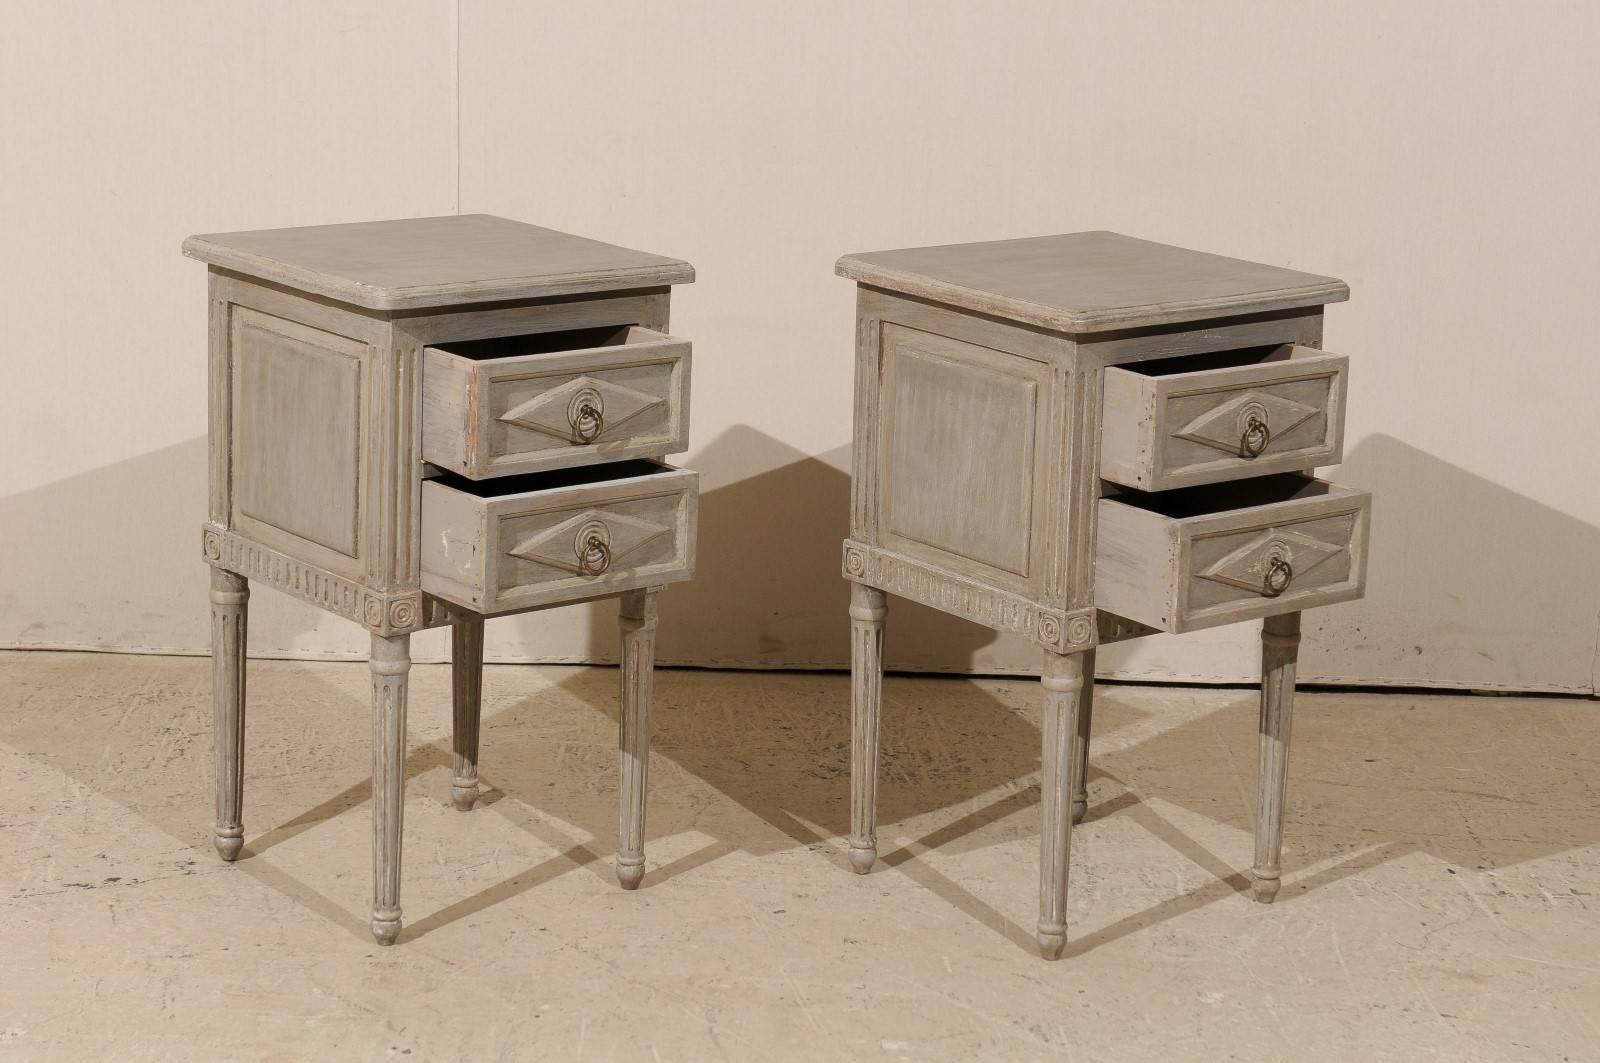 Pair of Small Sized Two-Drawer Painted Wood Nightstand Tables in Neutral Grey 4